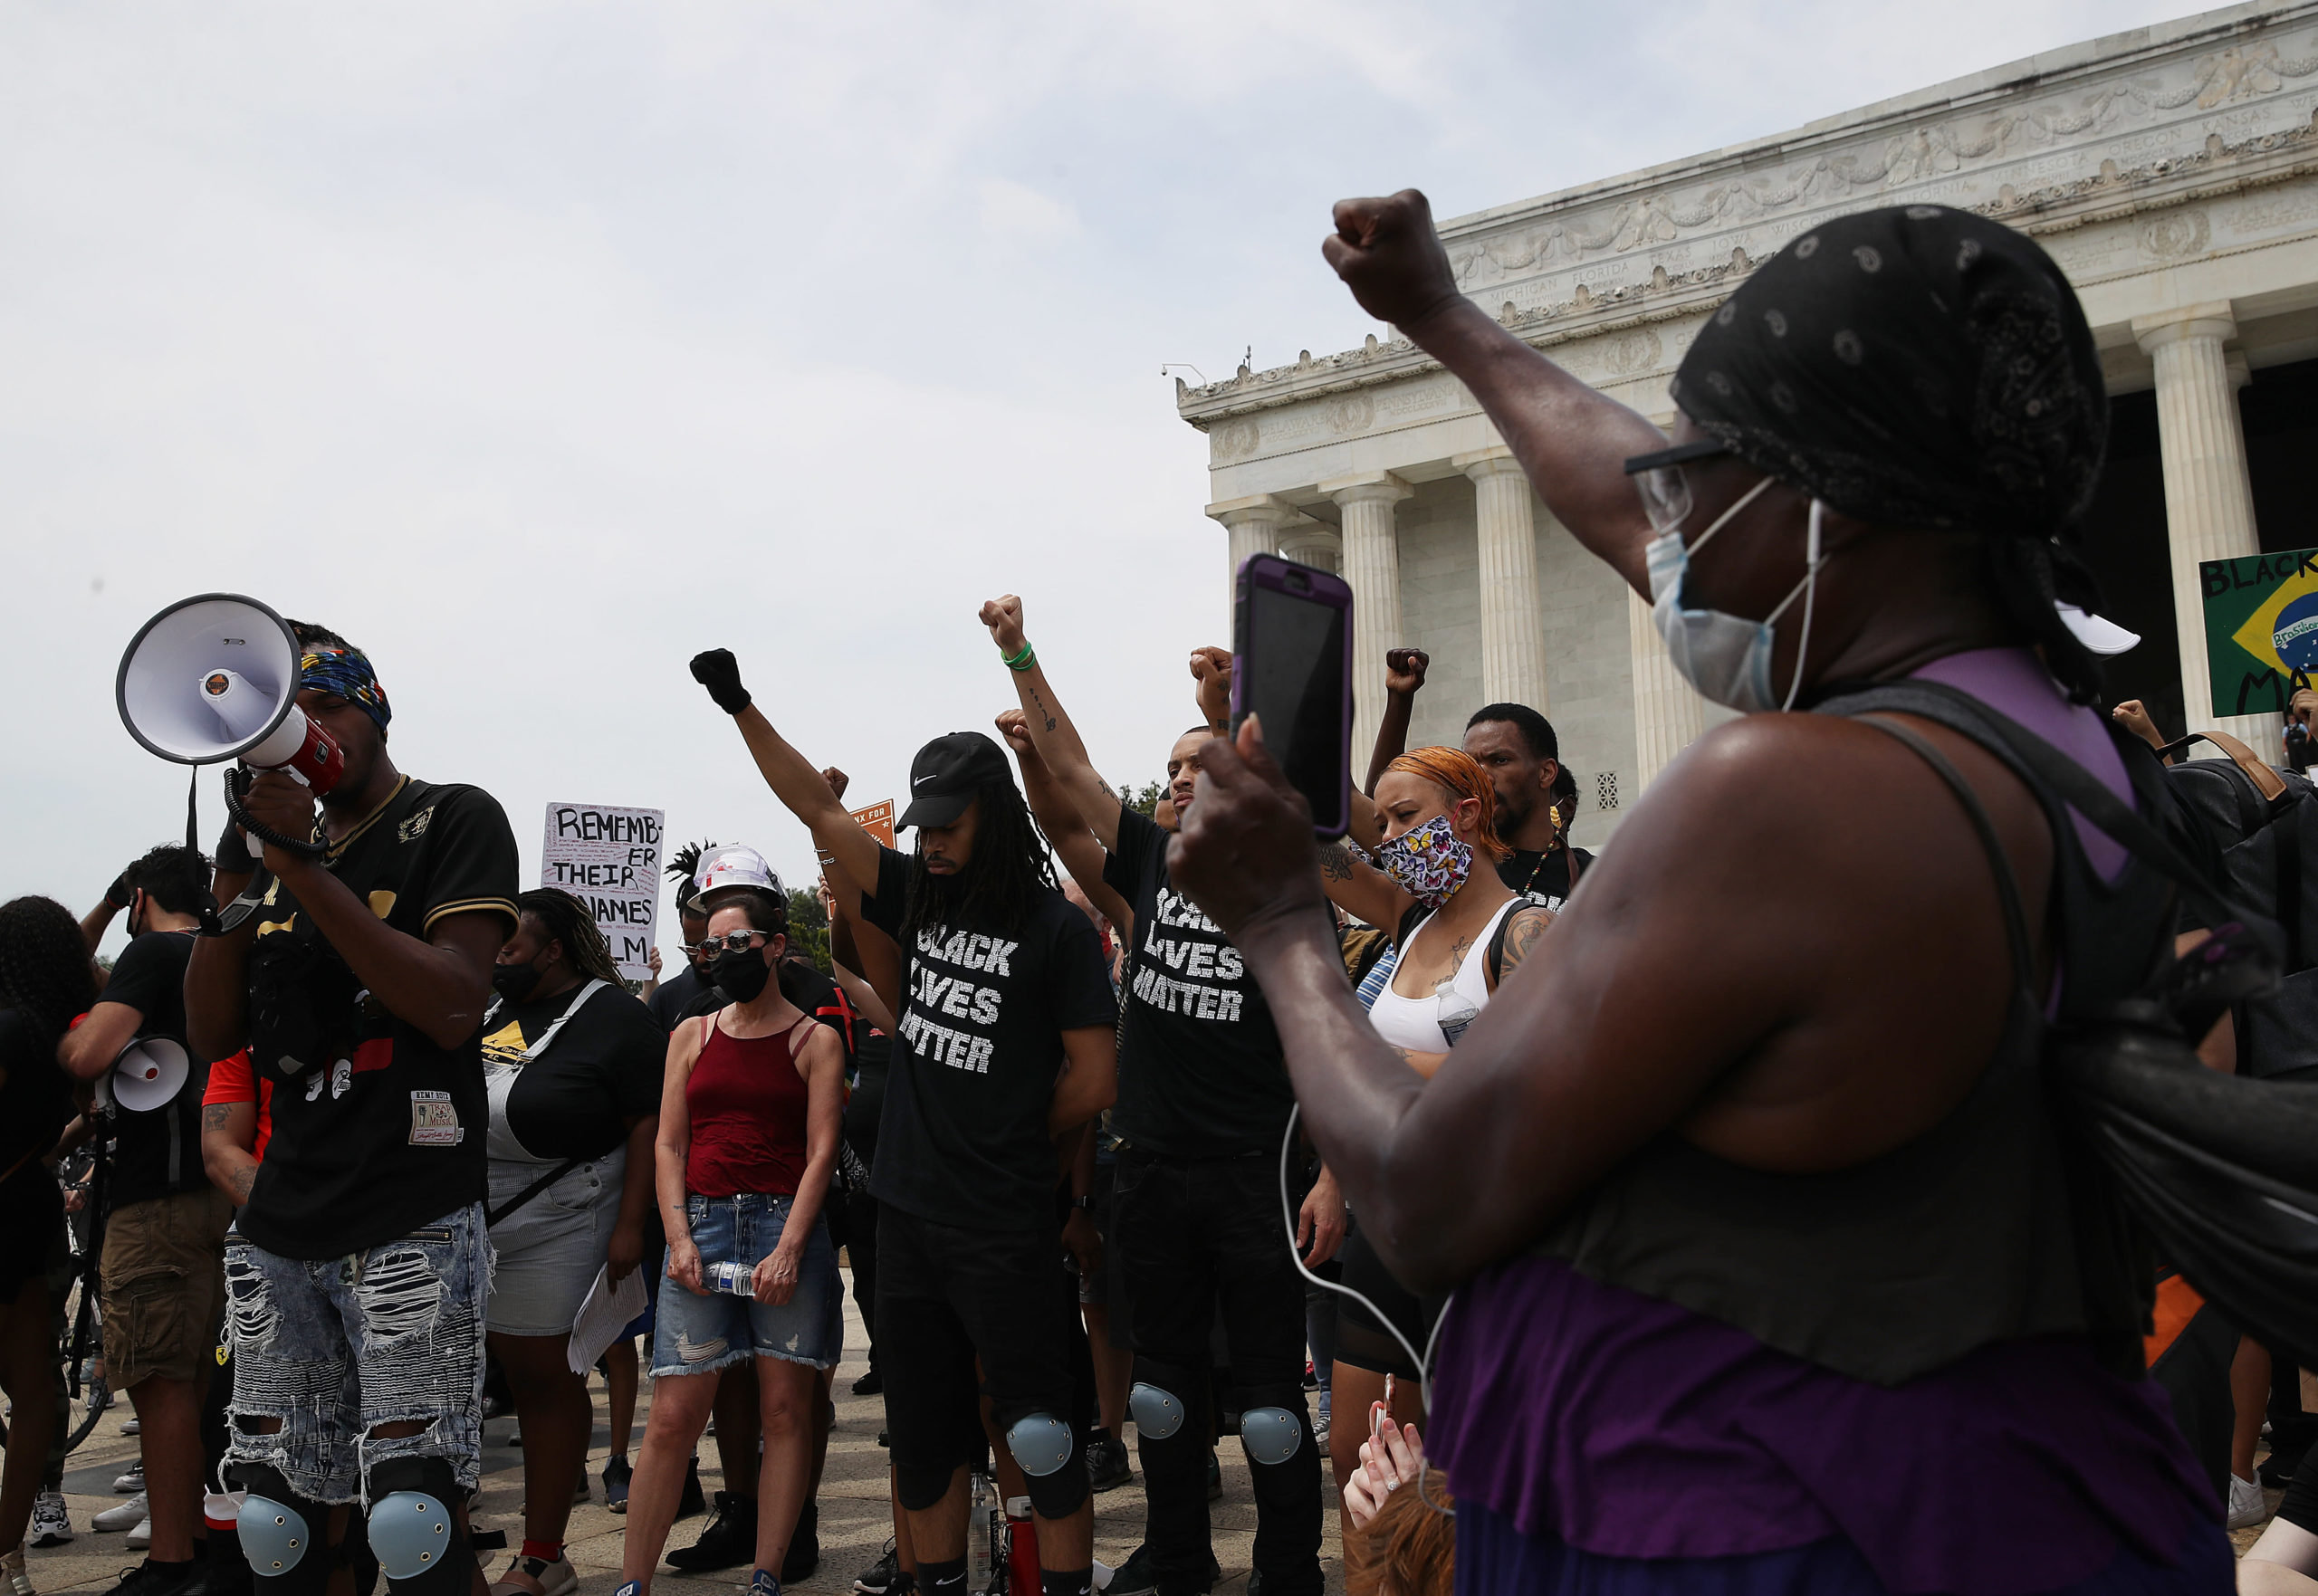 Large protests throughout the U.S. and the world proceed over police killing of George Floyd